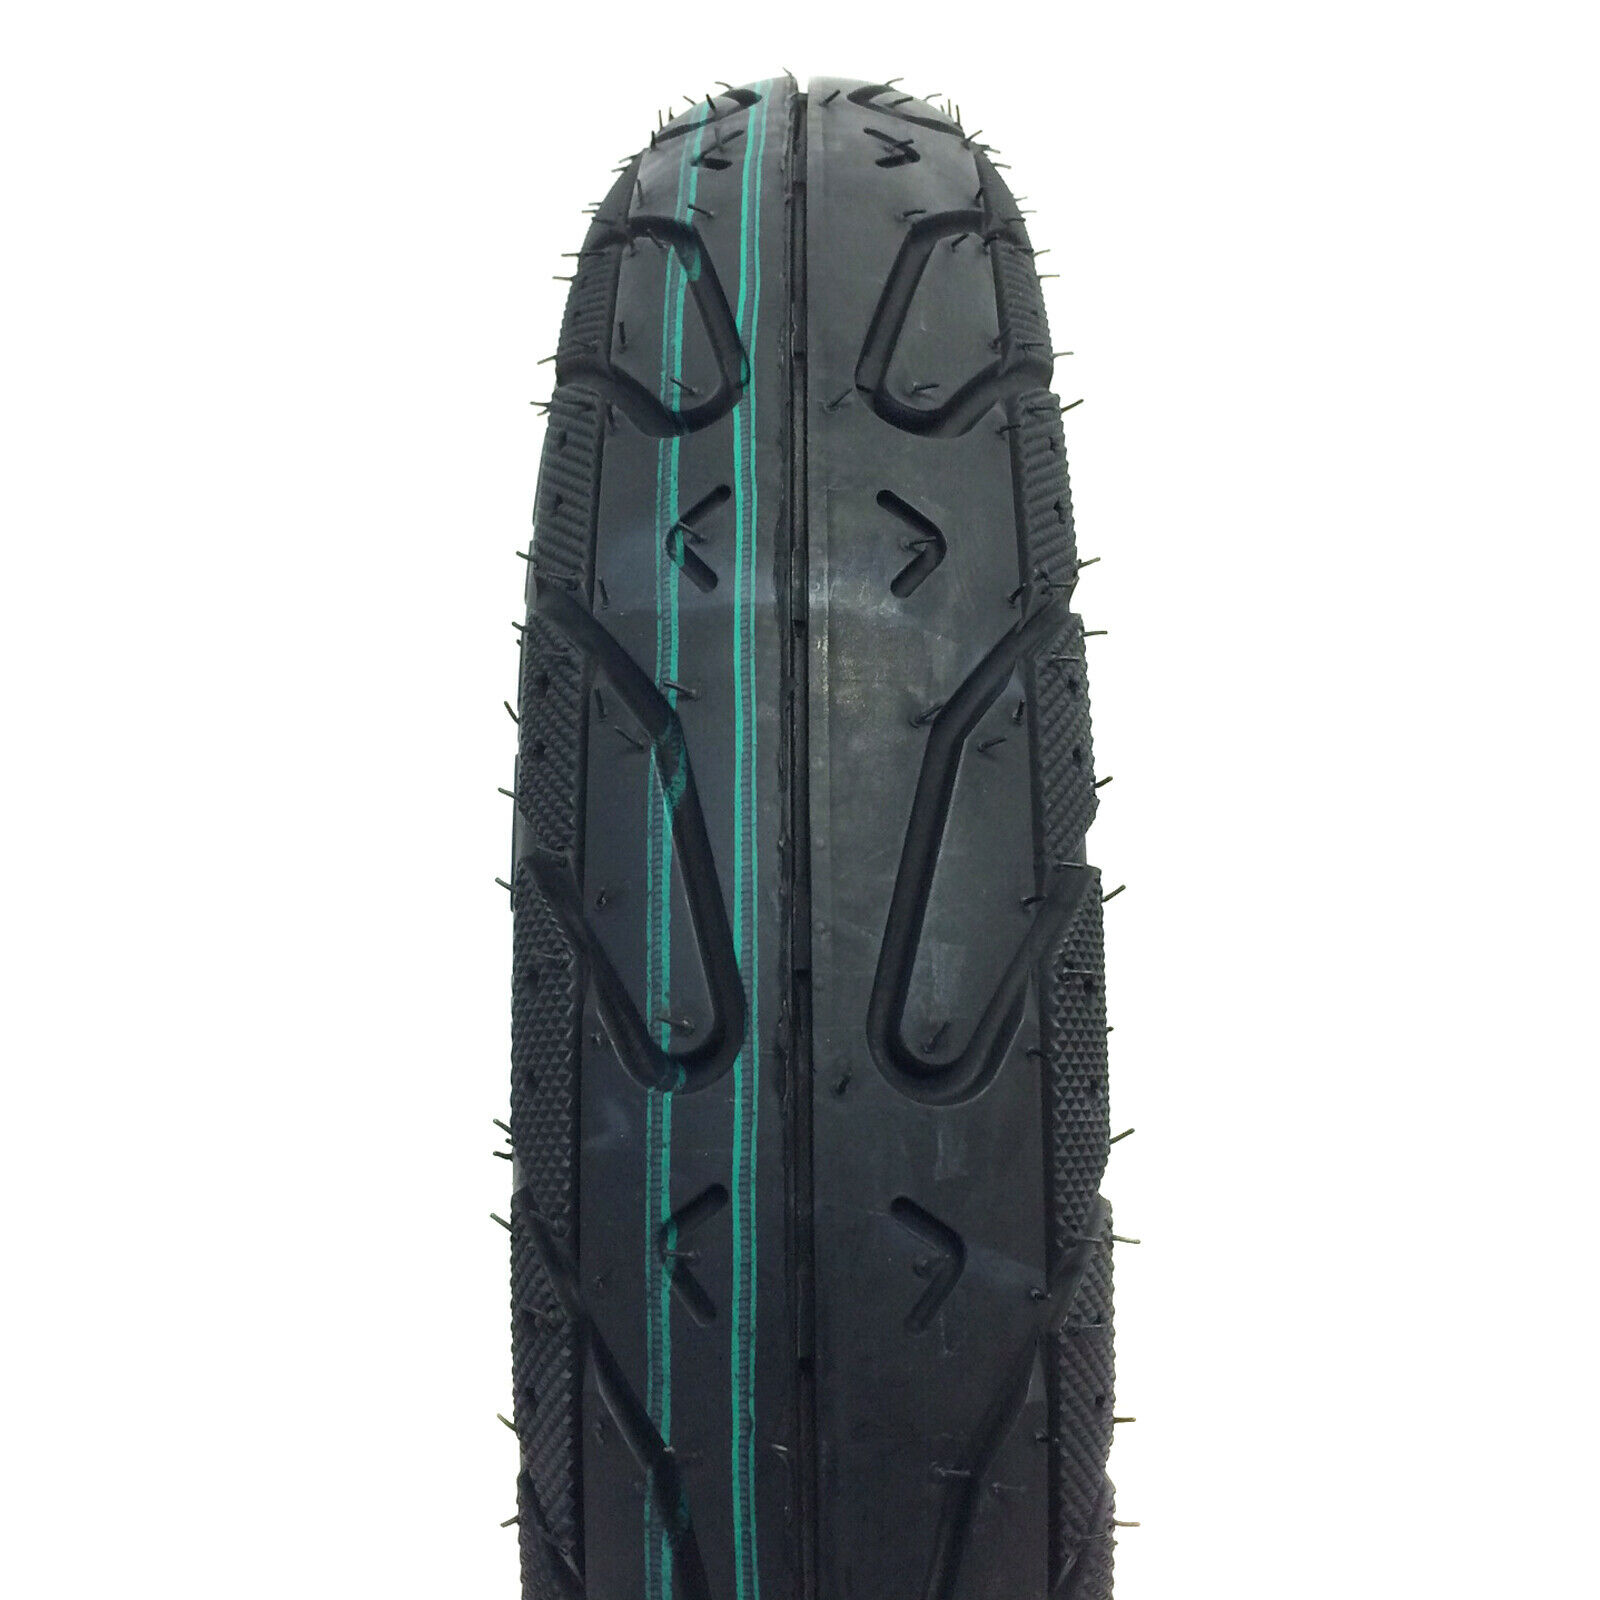 MMG Tubeless Tire 3.50-10 Front Rear Scooter Motorcycle Moped - 10